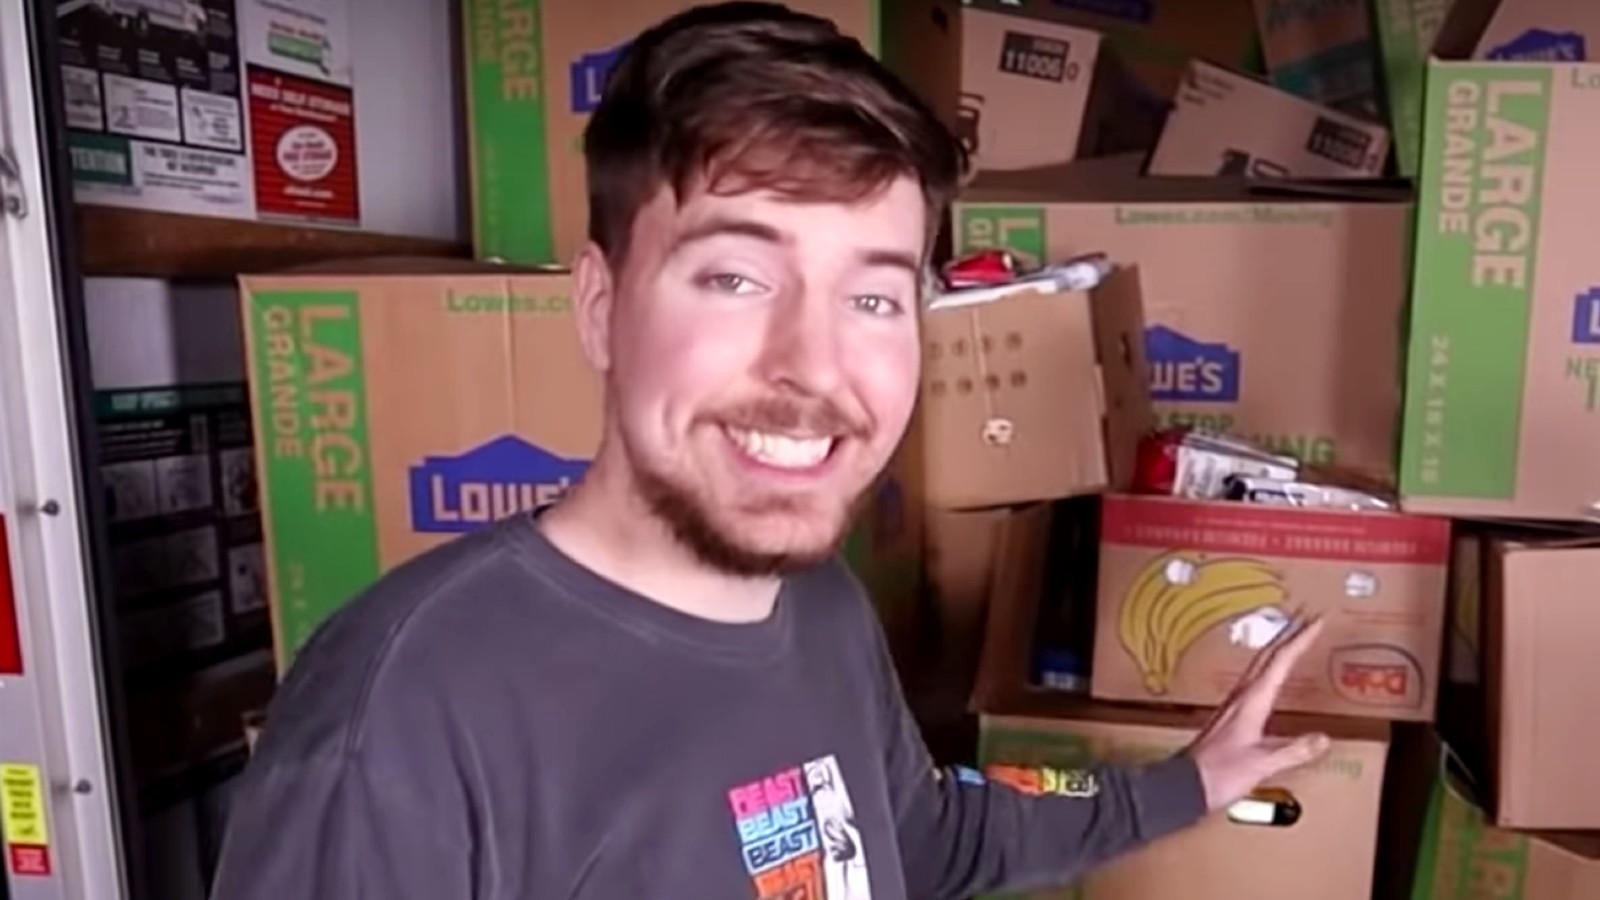 Unboxing Is So 2012. The Internet Wants Packing Videos